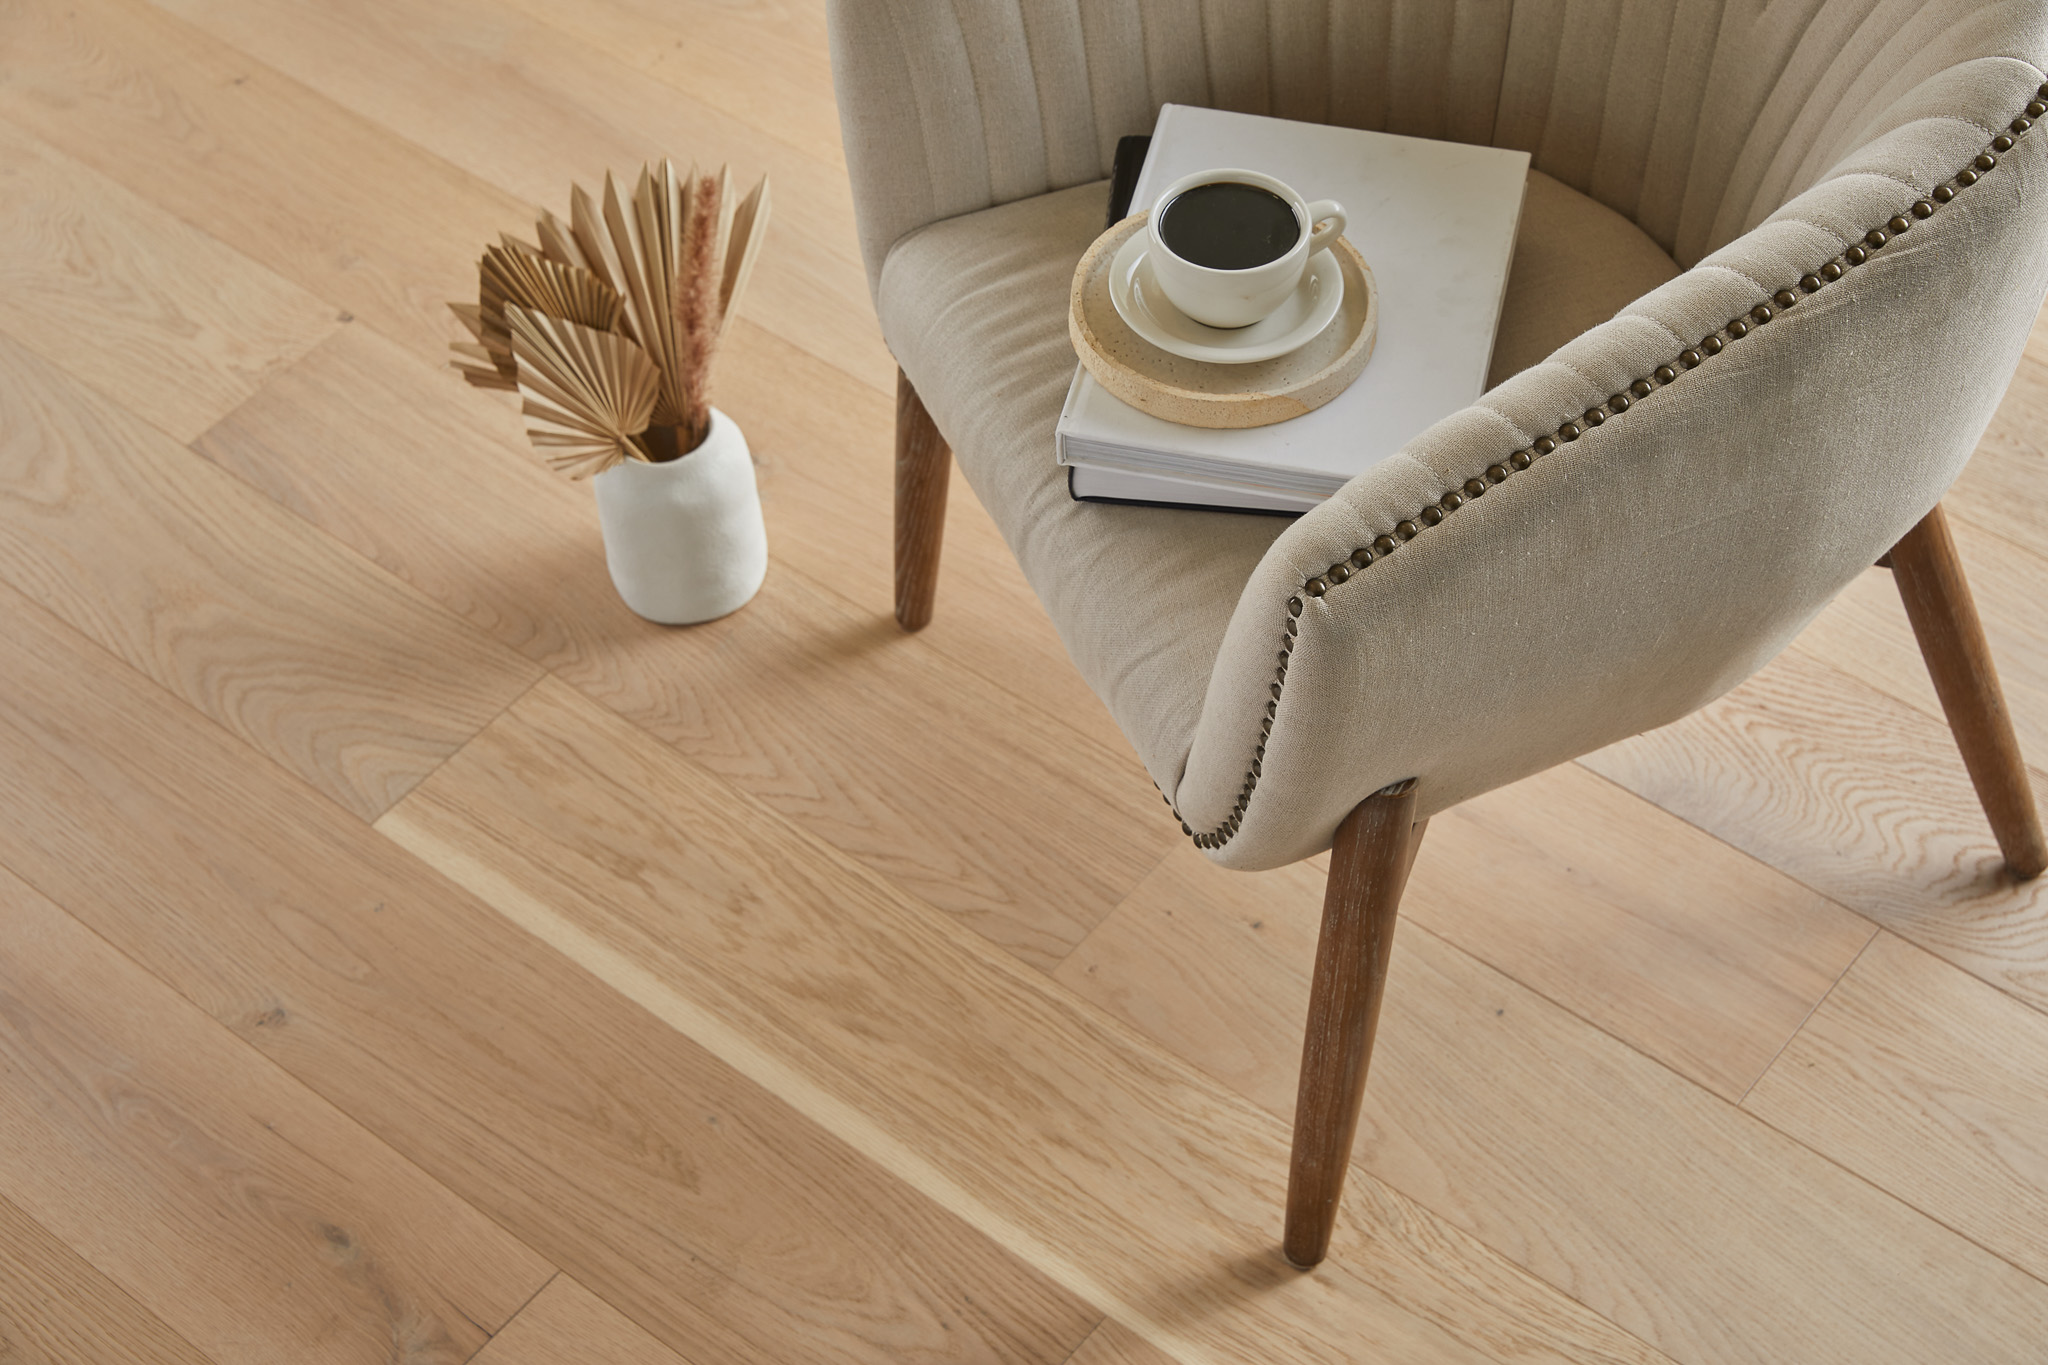 Photo of a Kentwood Collection floor in a real-world setting.